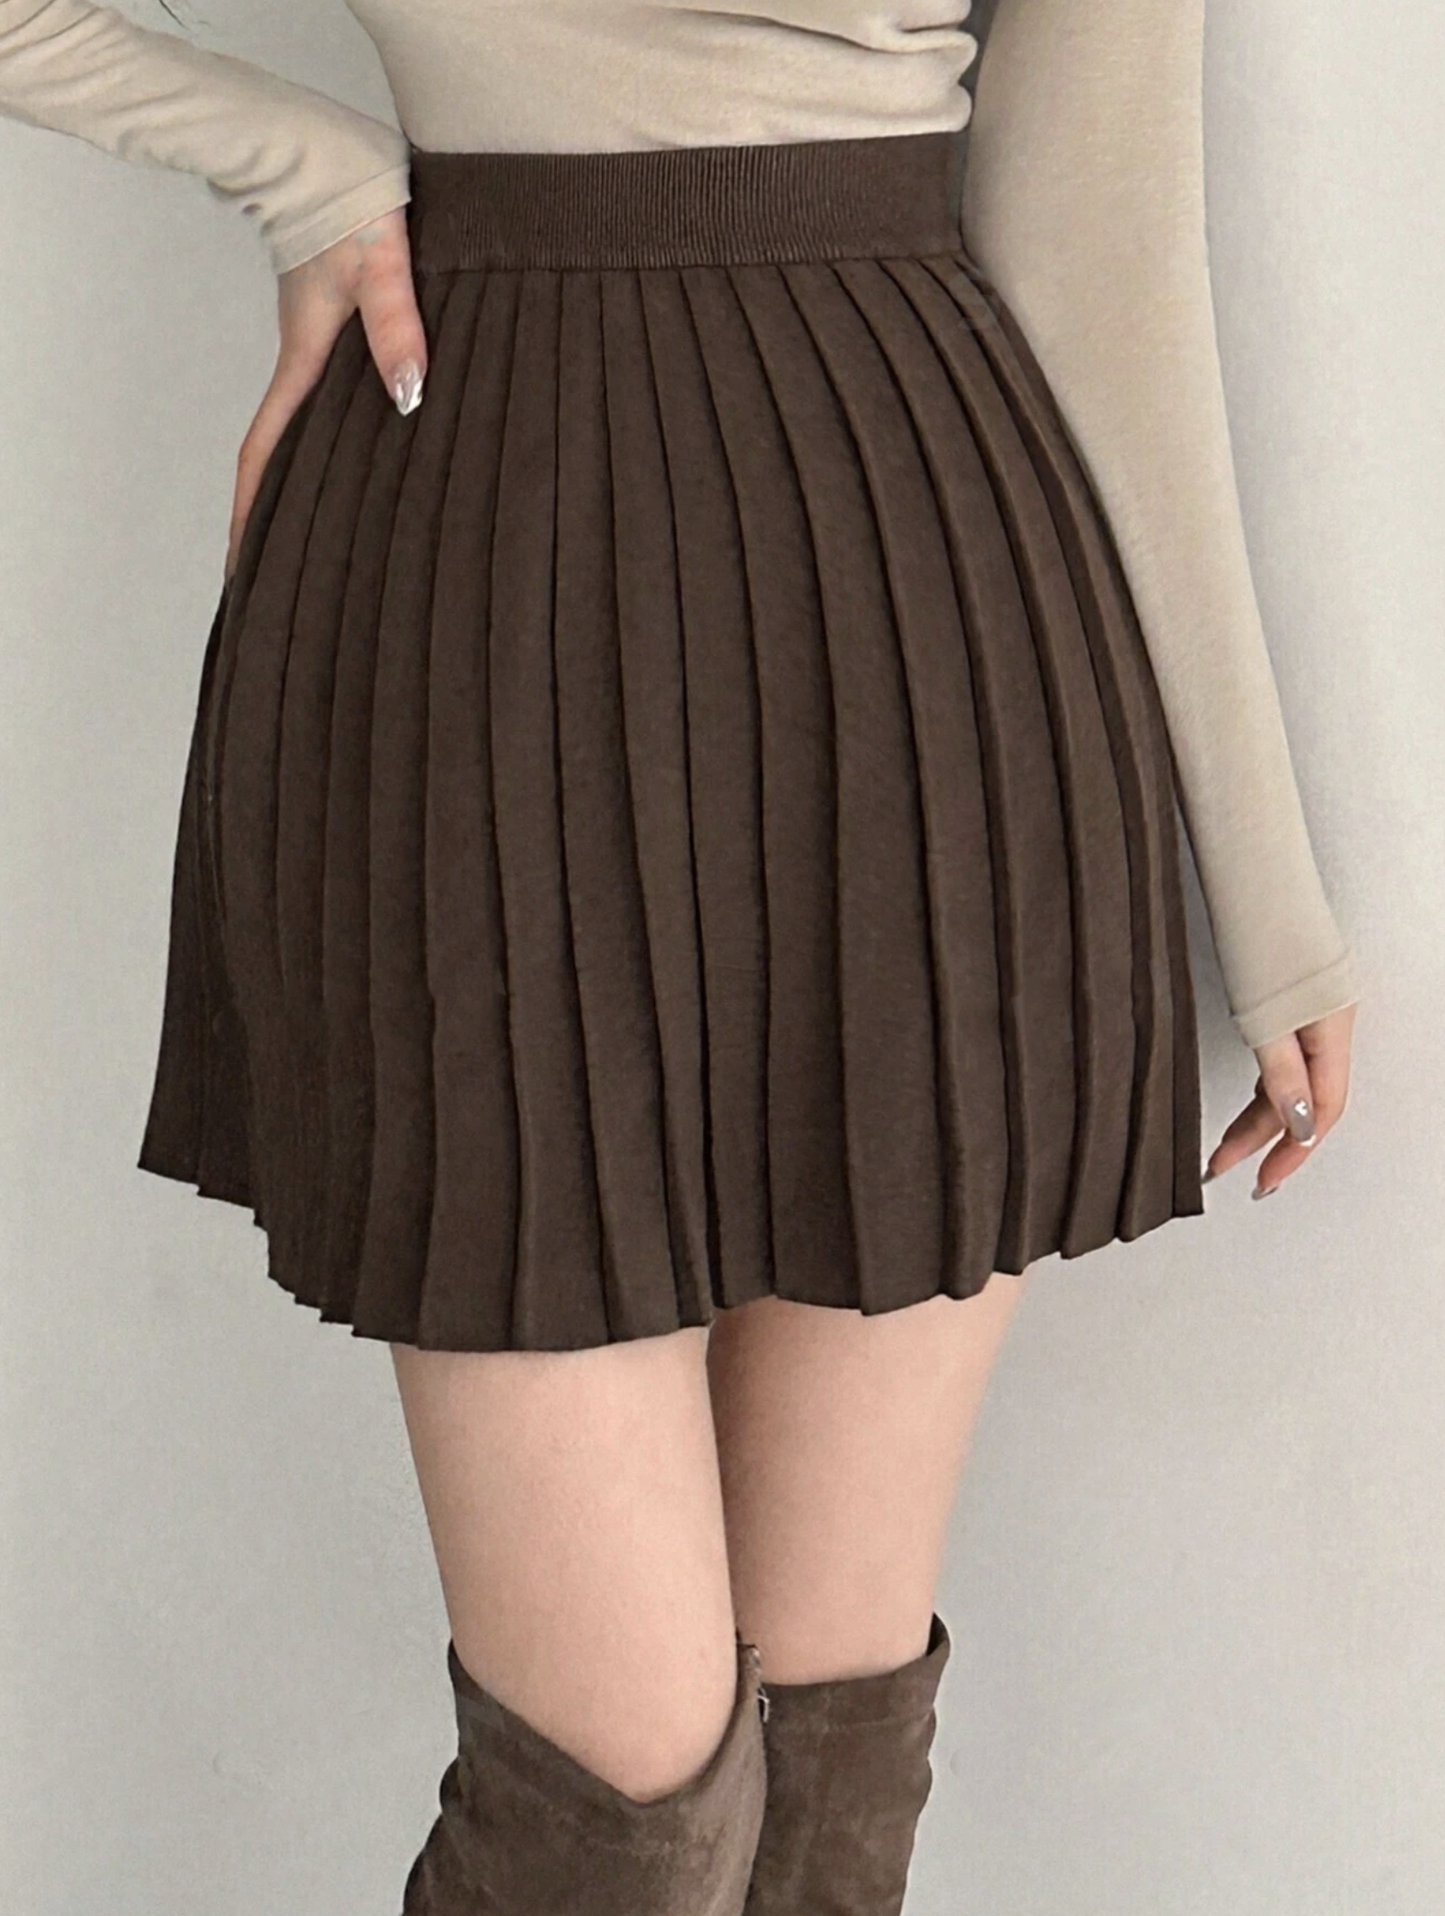 Cute Skirt♥ Pleated Knit Skirt 4 Colors